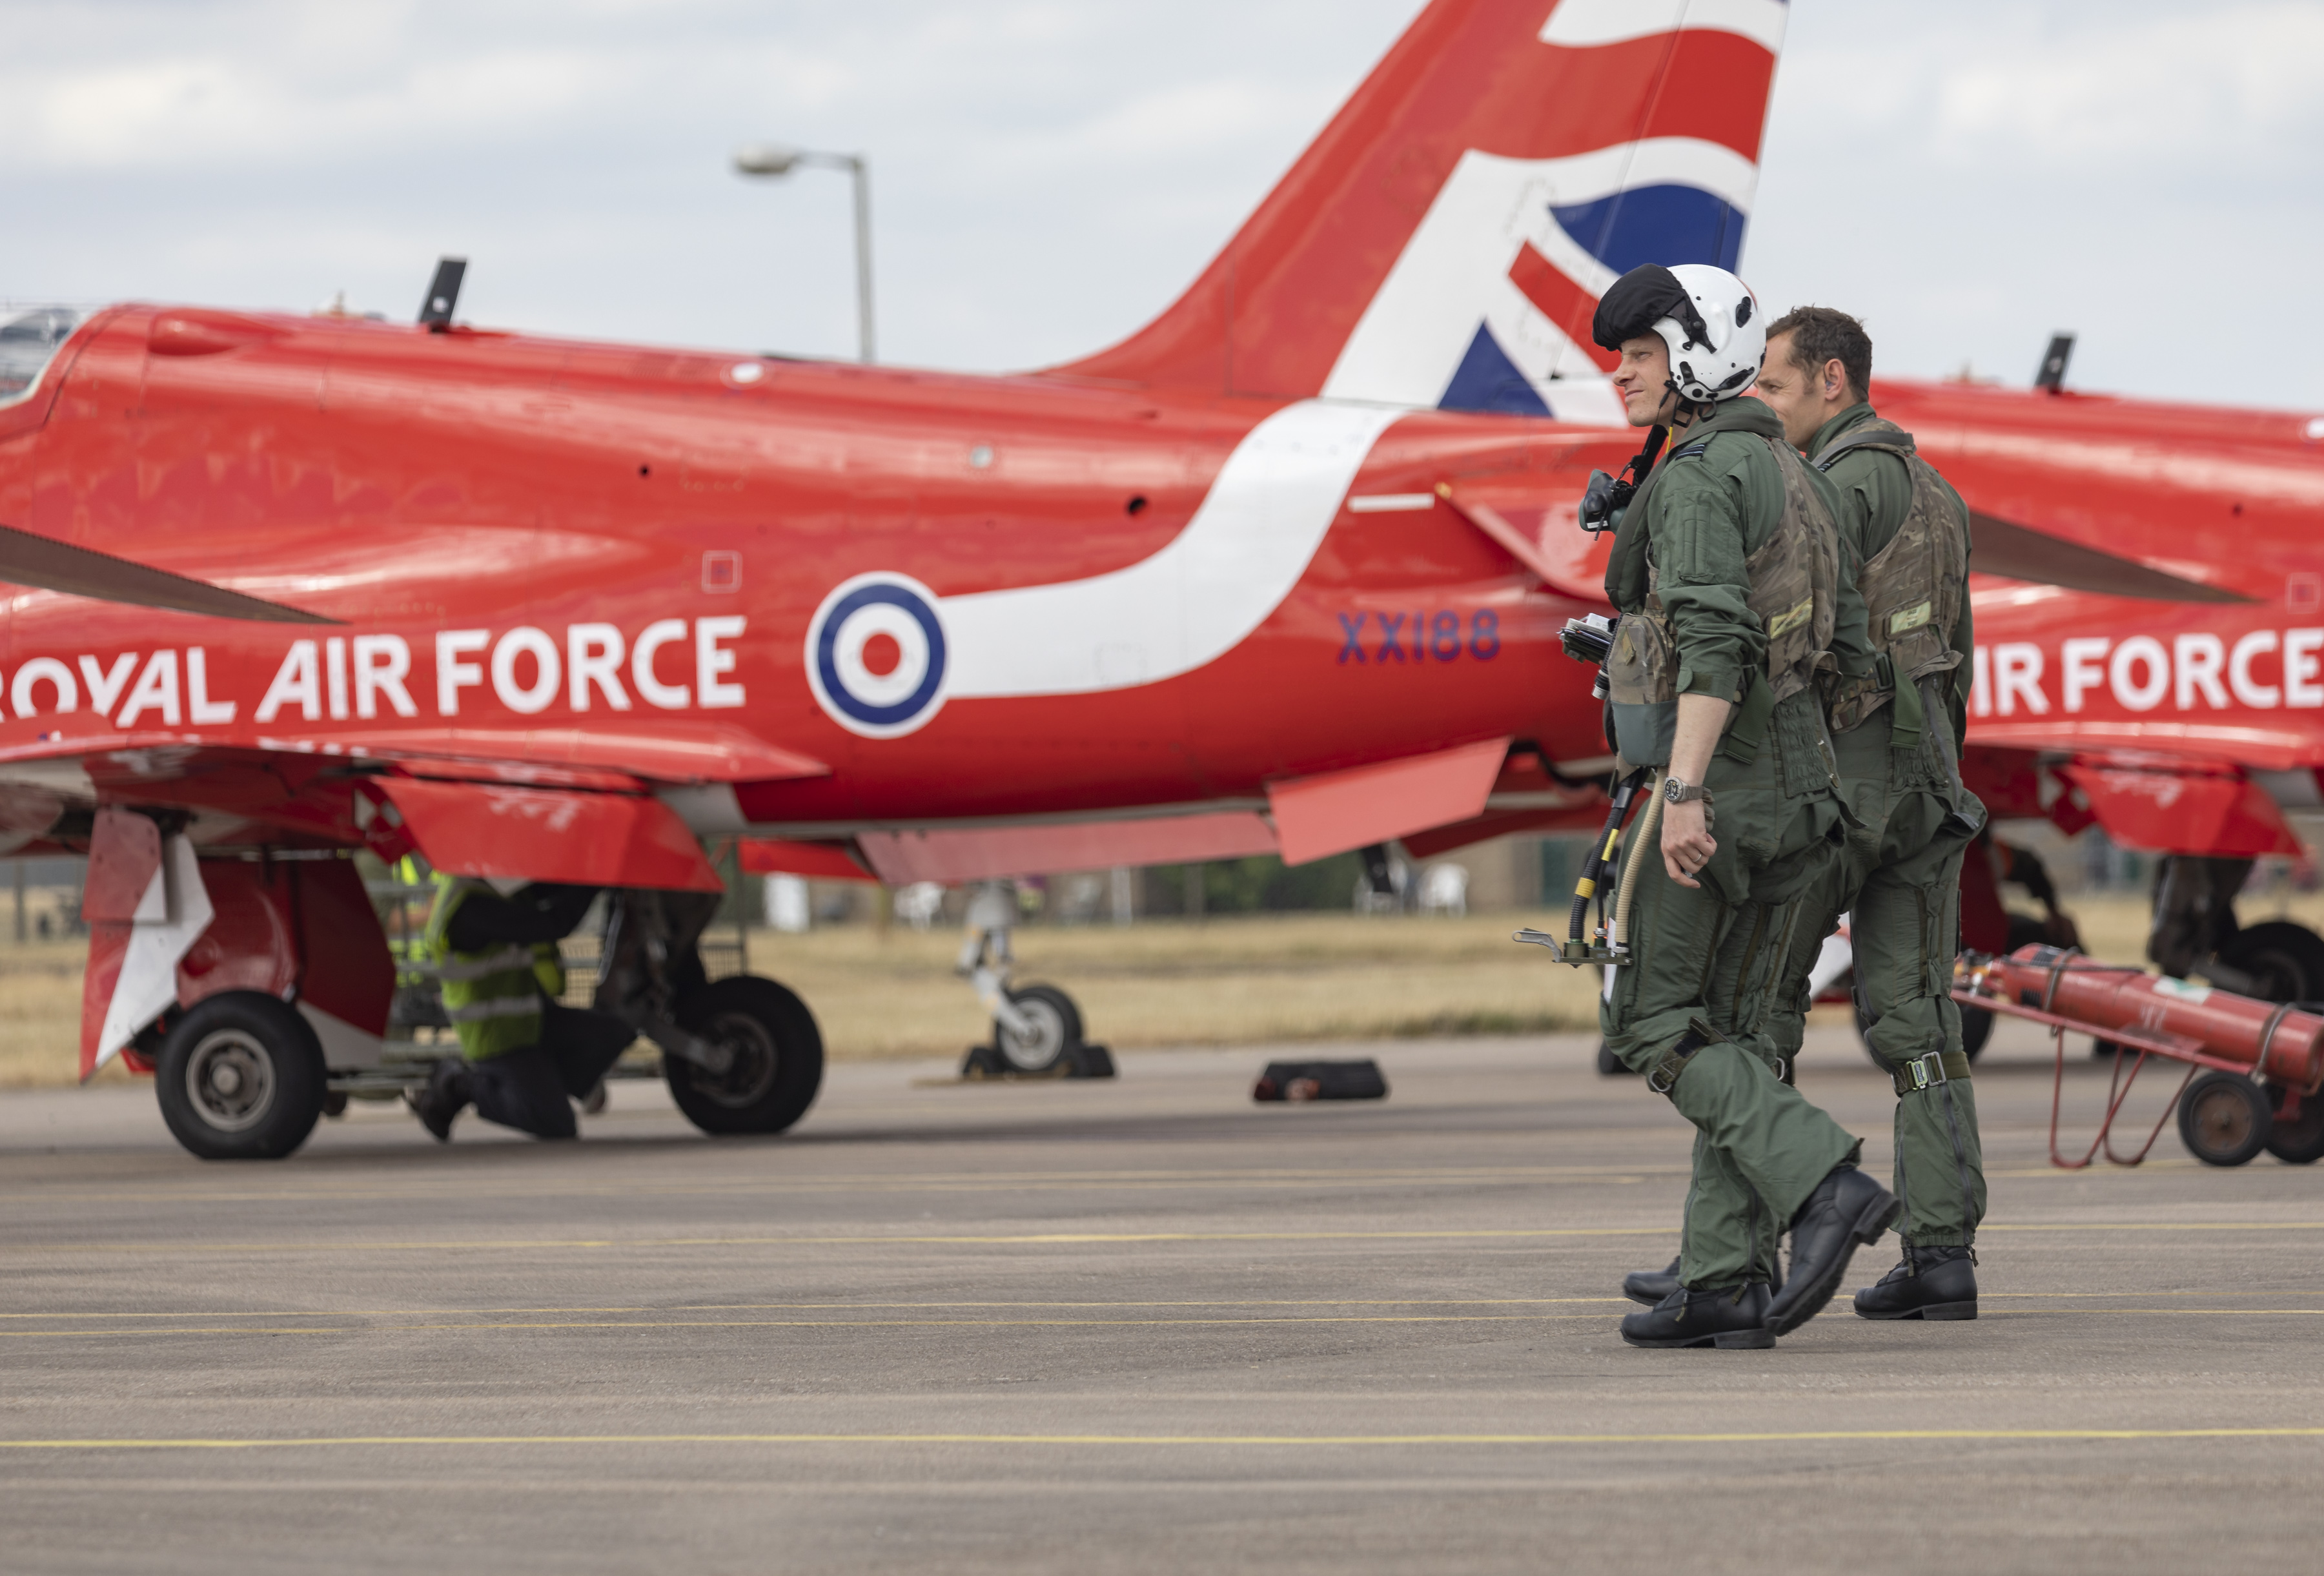 Image shows RAF Pilots walking on the airfield with Red Arrow Hawk aircraft.